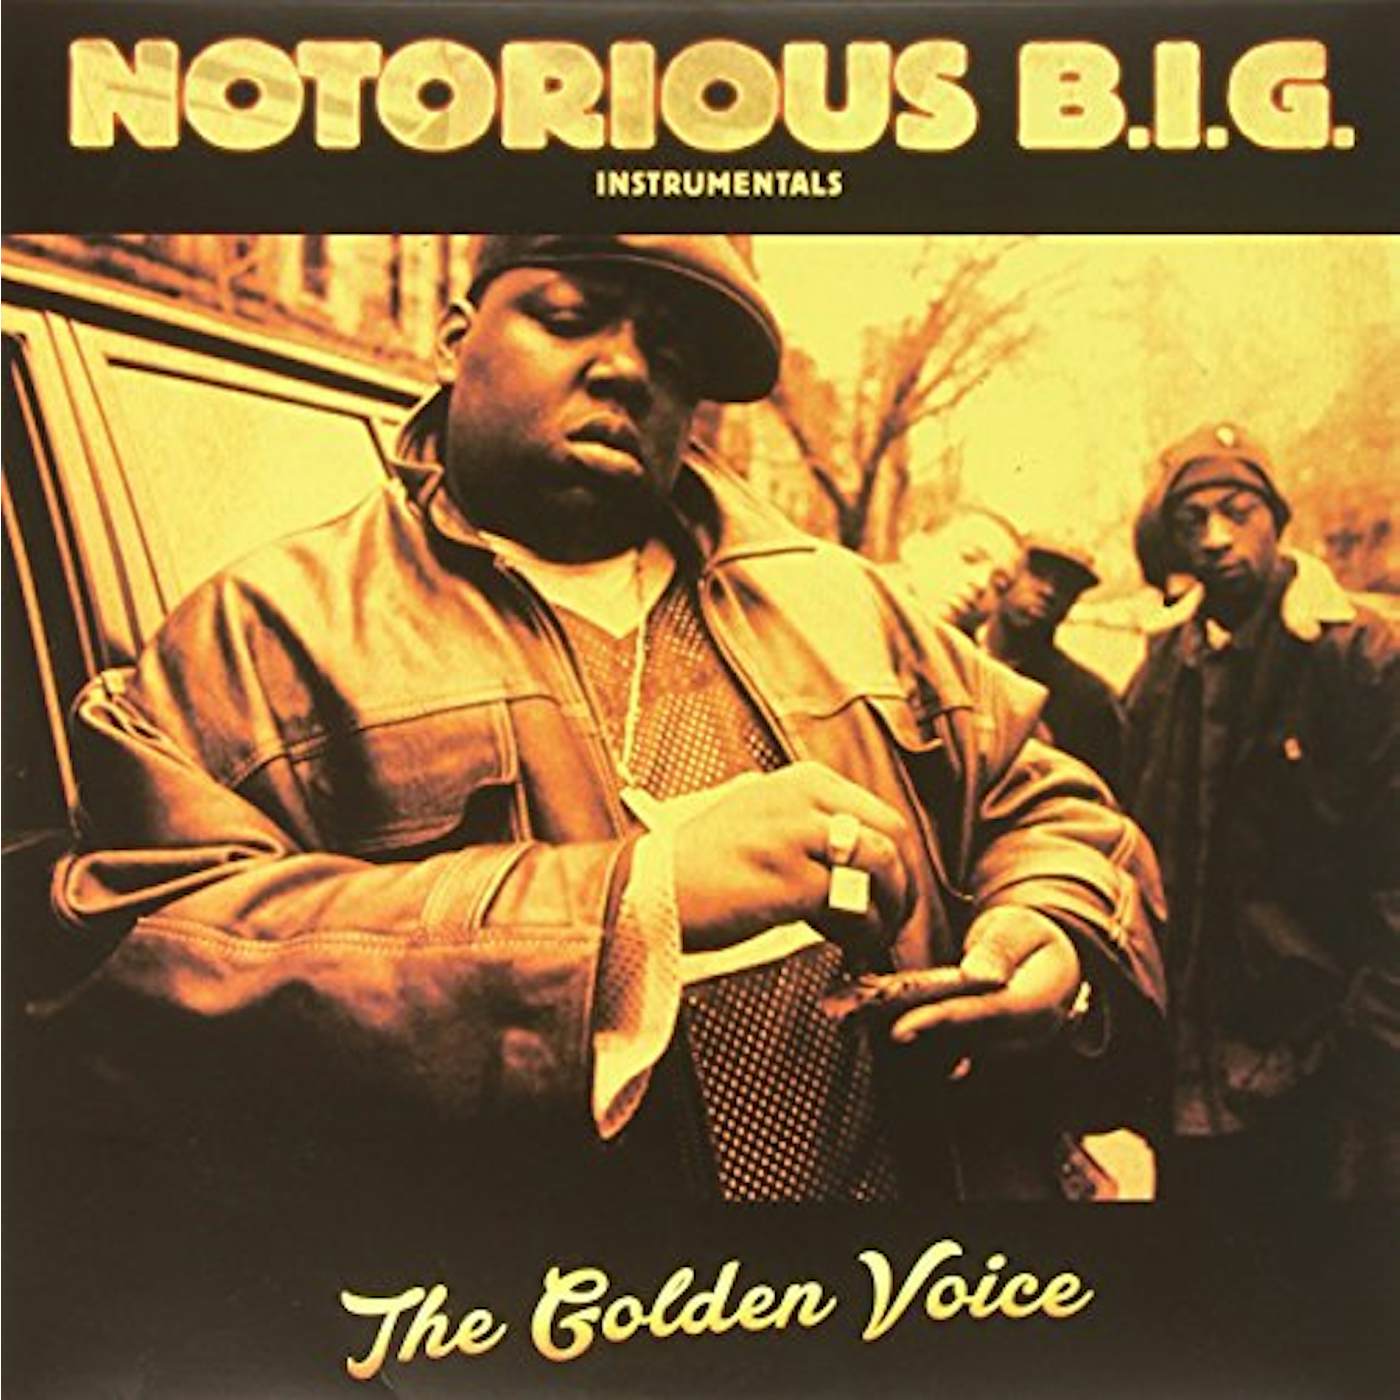 The Notorious B.I.G. INSTRUMENTALS THE GOLDEN VOICE Vinyl Record